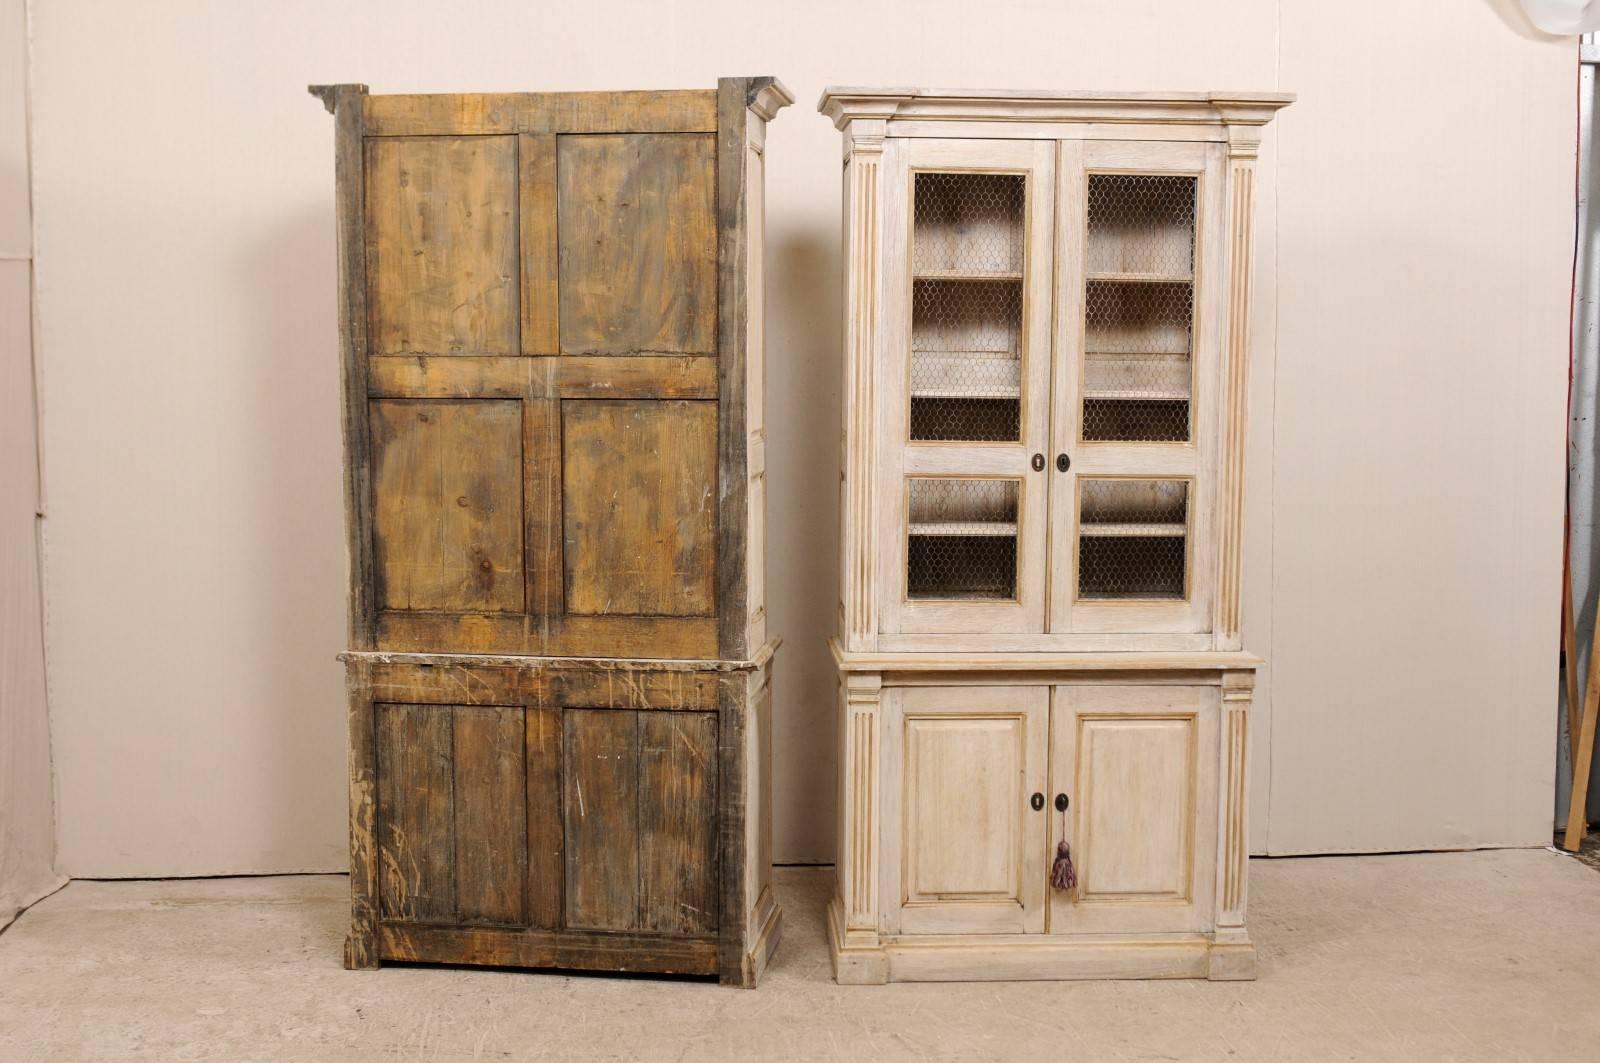 Pair of 19th Century Tall Painted Wood Cabinets with Wire on the Cabinet Doors 4